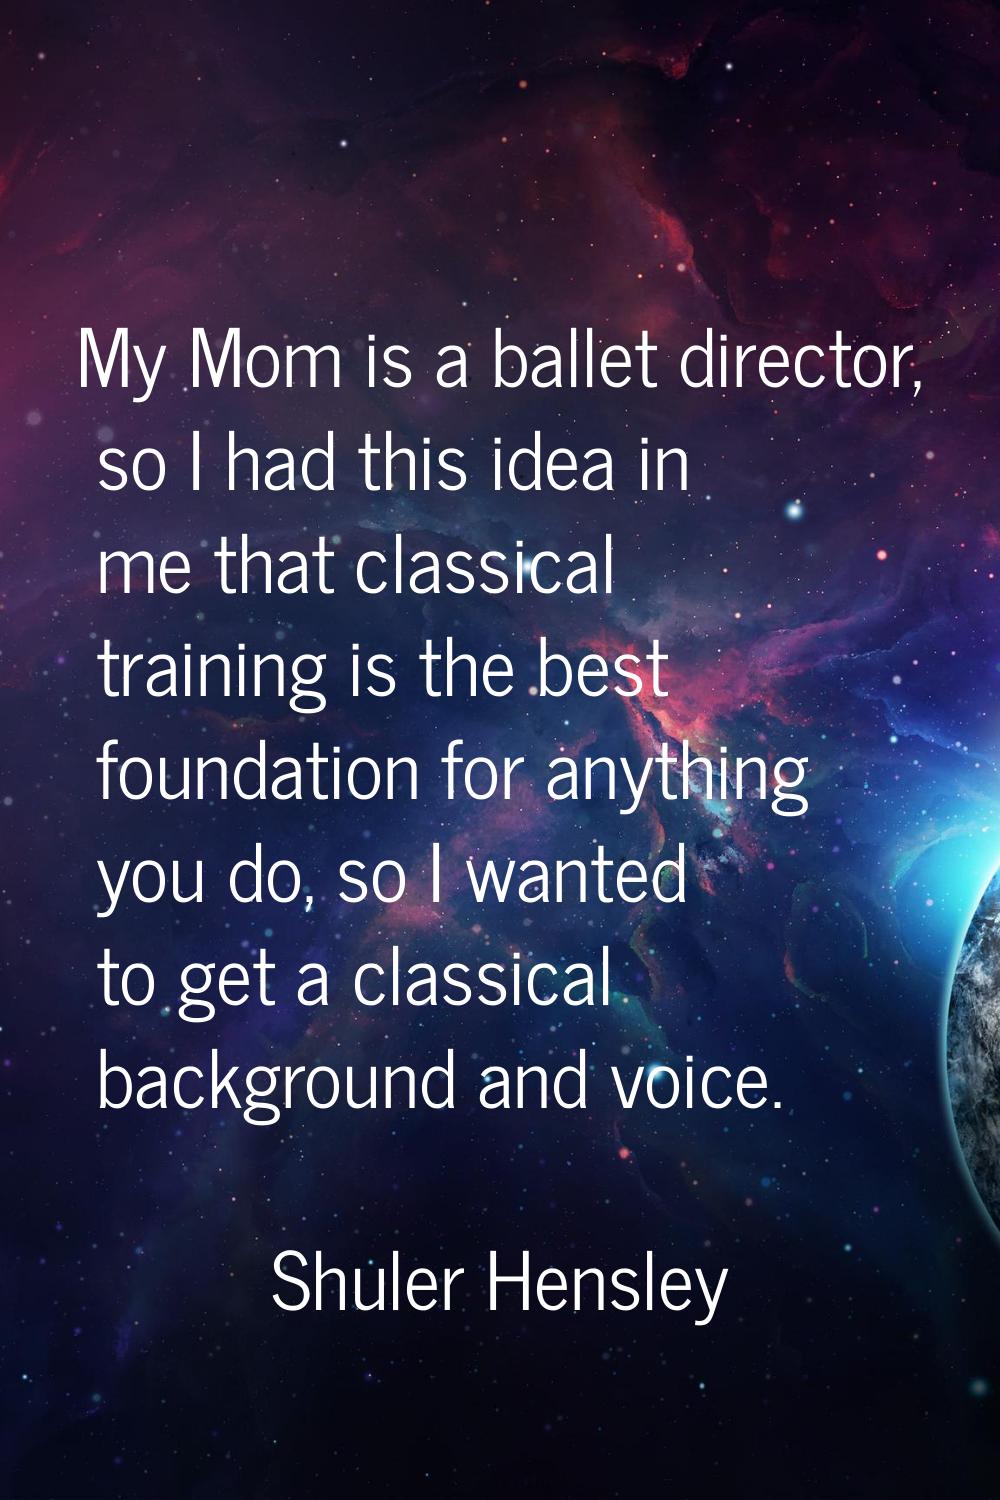 My Mom is a ballet director, so I had this idea in me that classical training is the best foundatio